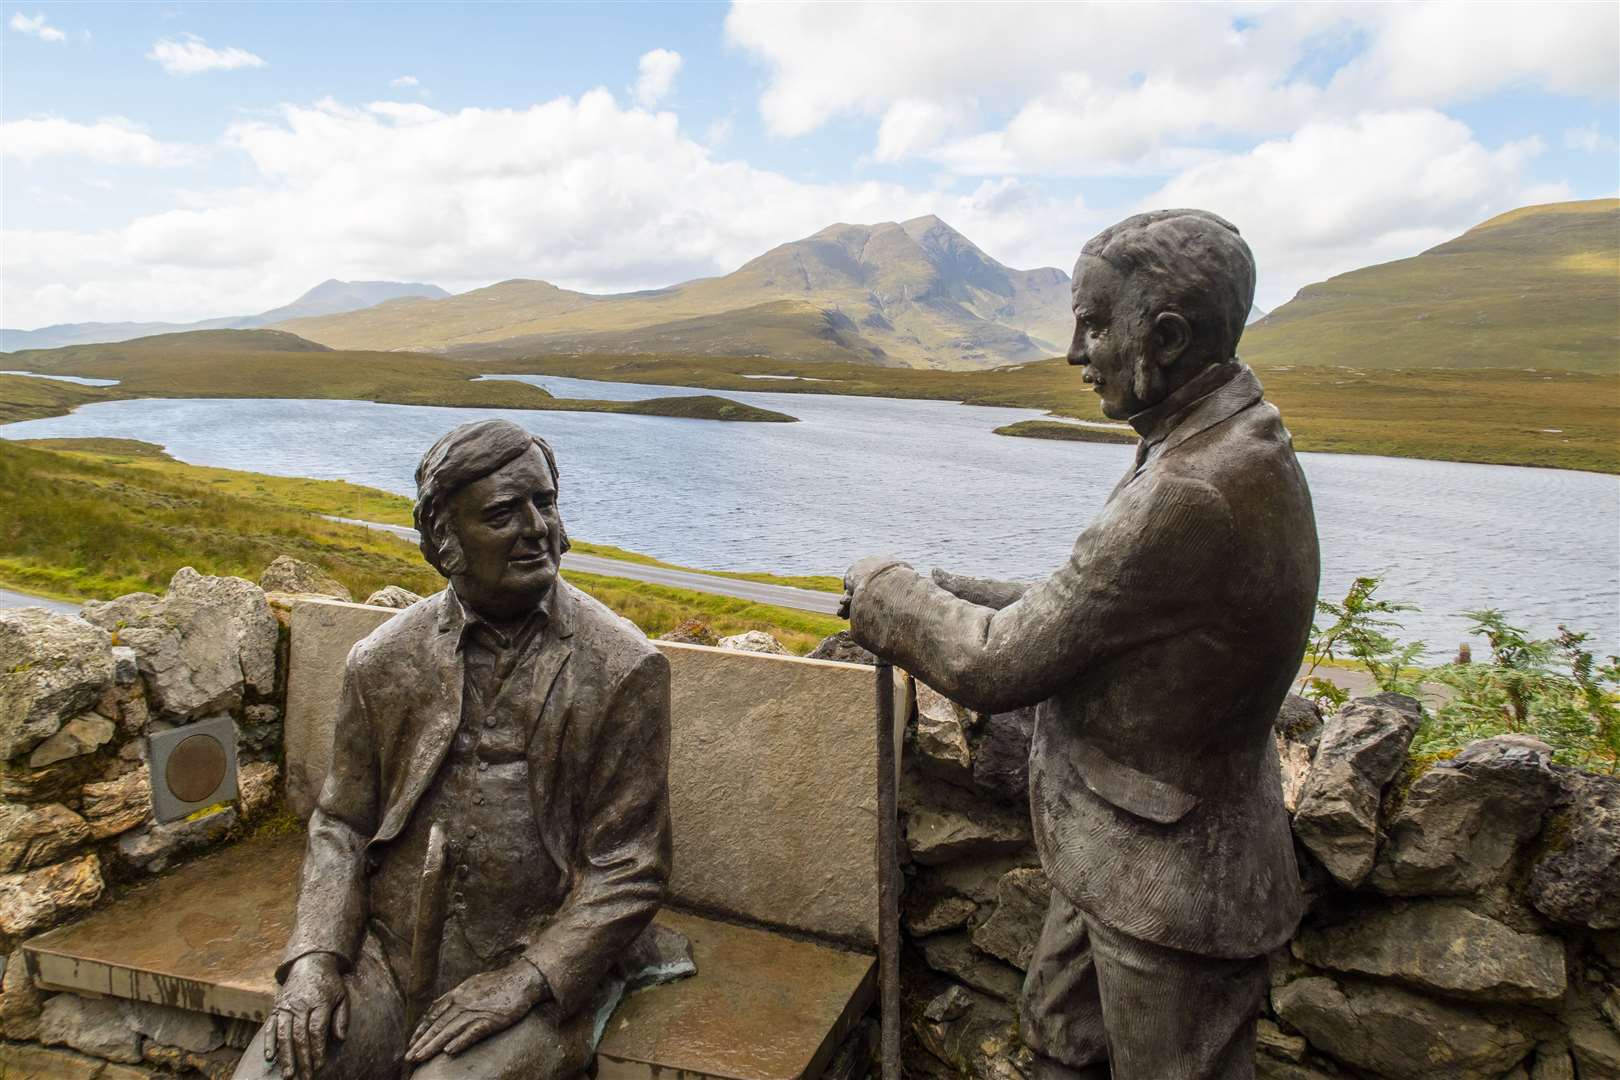 Statues of the geologists Benjamin Peach and John Horne at hiking trail at Knockan Crag.